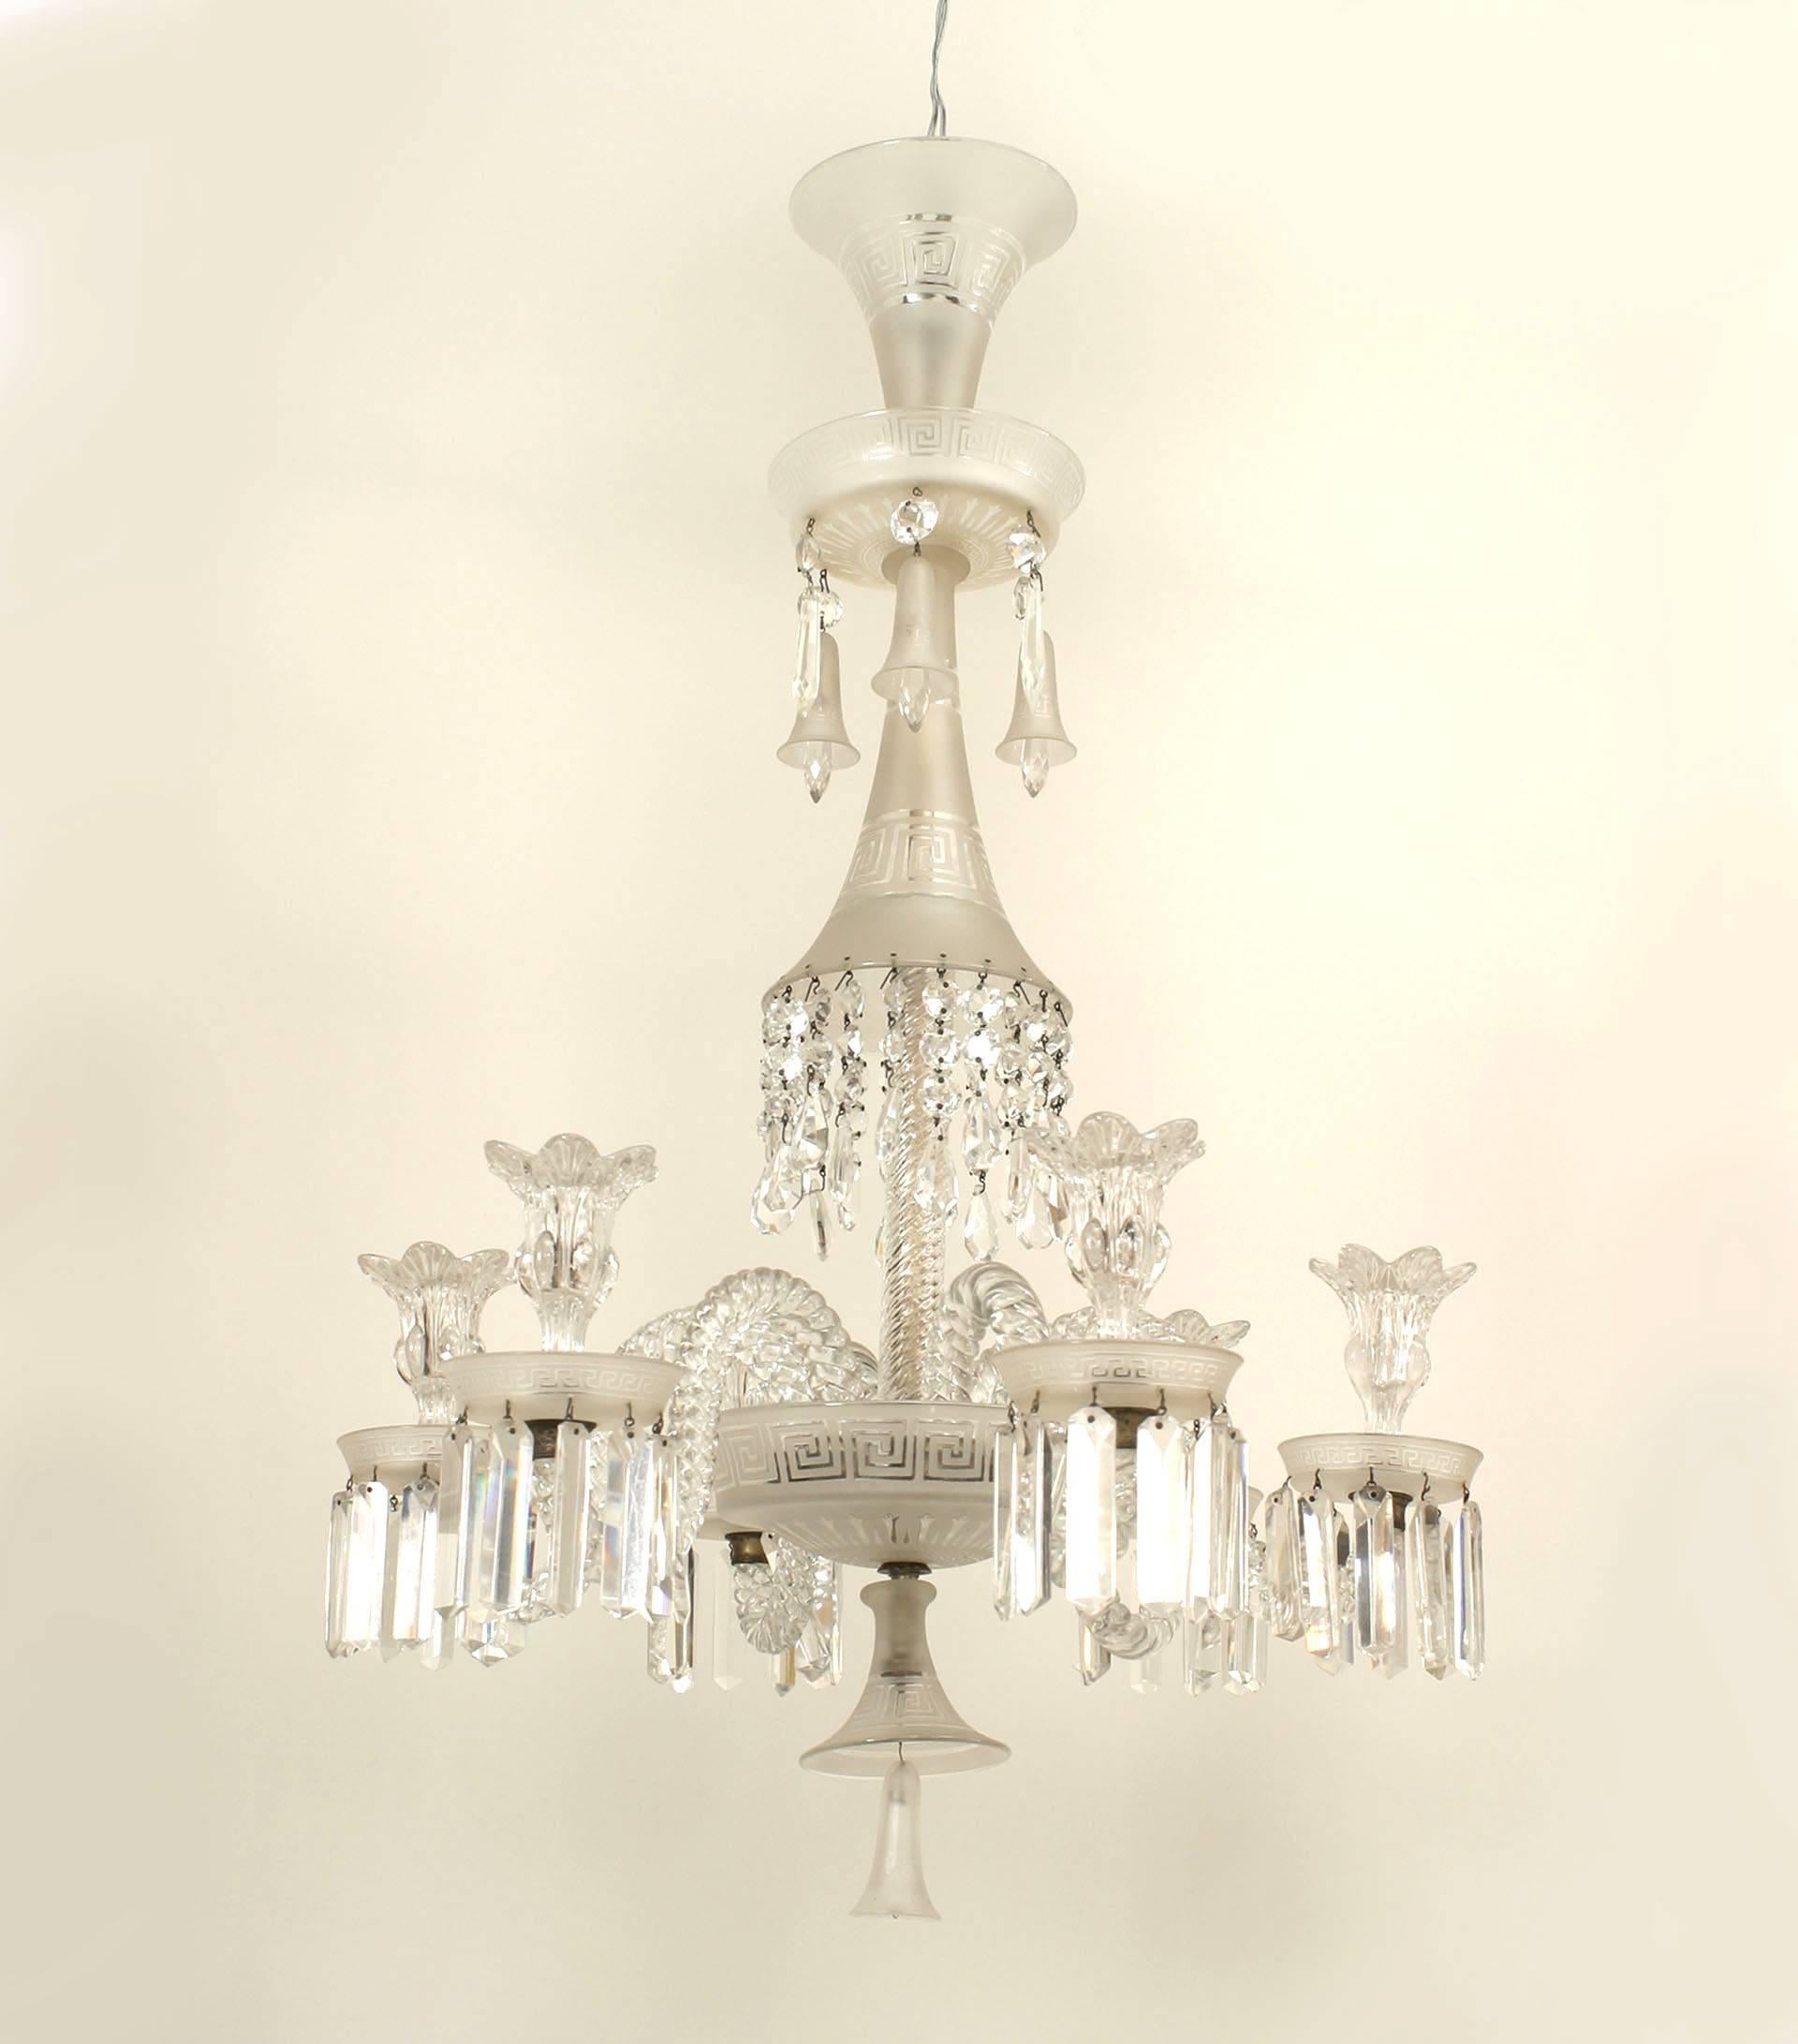 French (19th Century) frosted & clear Baccarat crystal chandelier with two-tiered ten upswept swirl arms having etched Greek key motif bobeche & crystal drops and a finial ball bottom.
